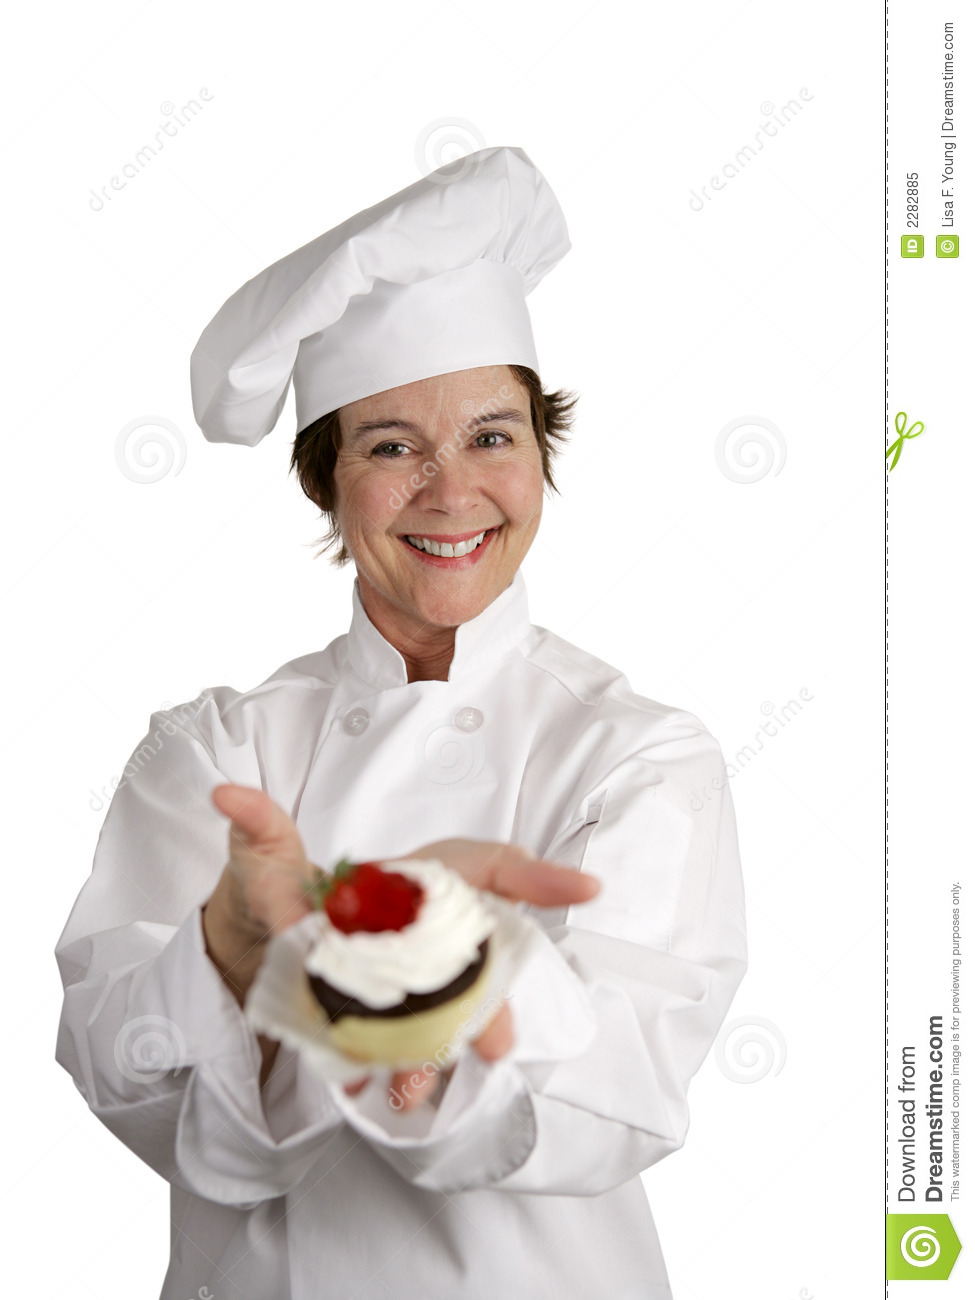 Friendly Happy Looking Pastry Chef Holding A Dessert She Just Made    